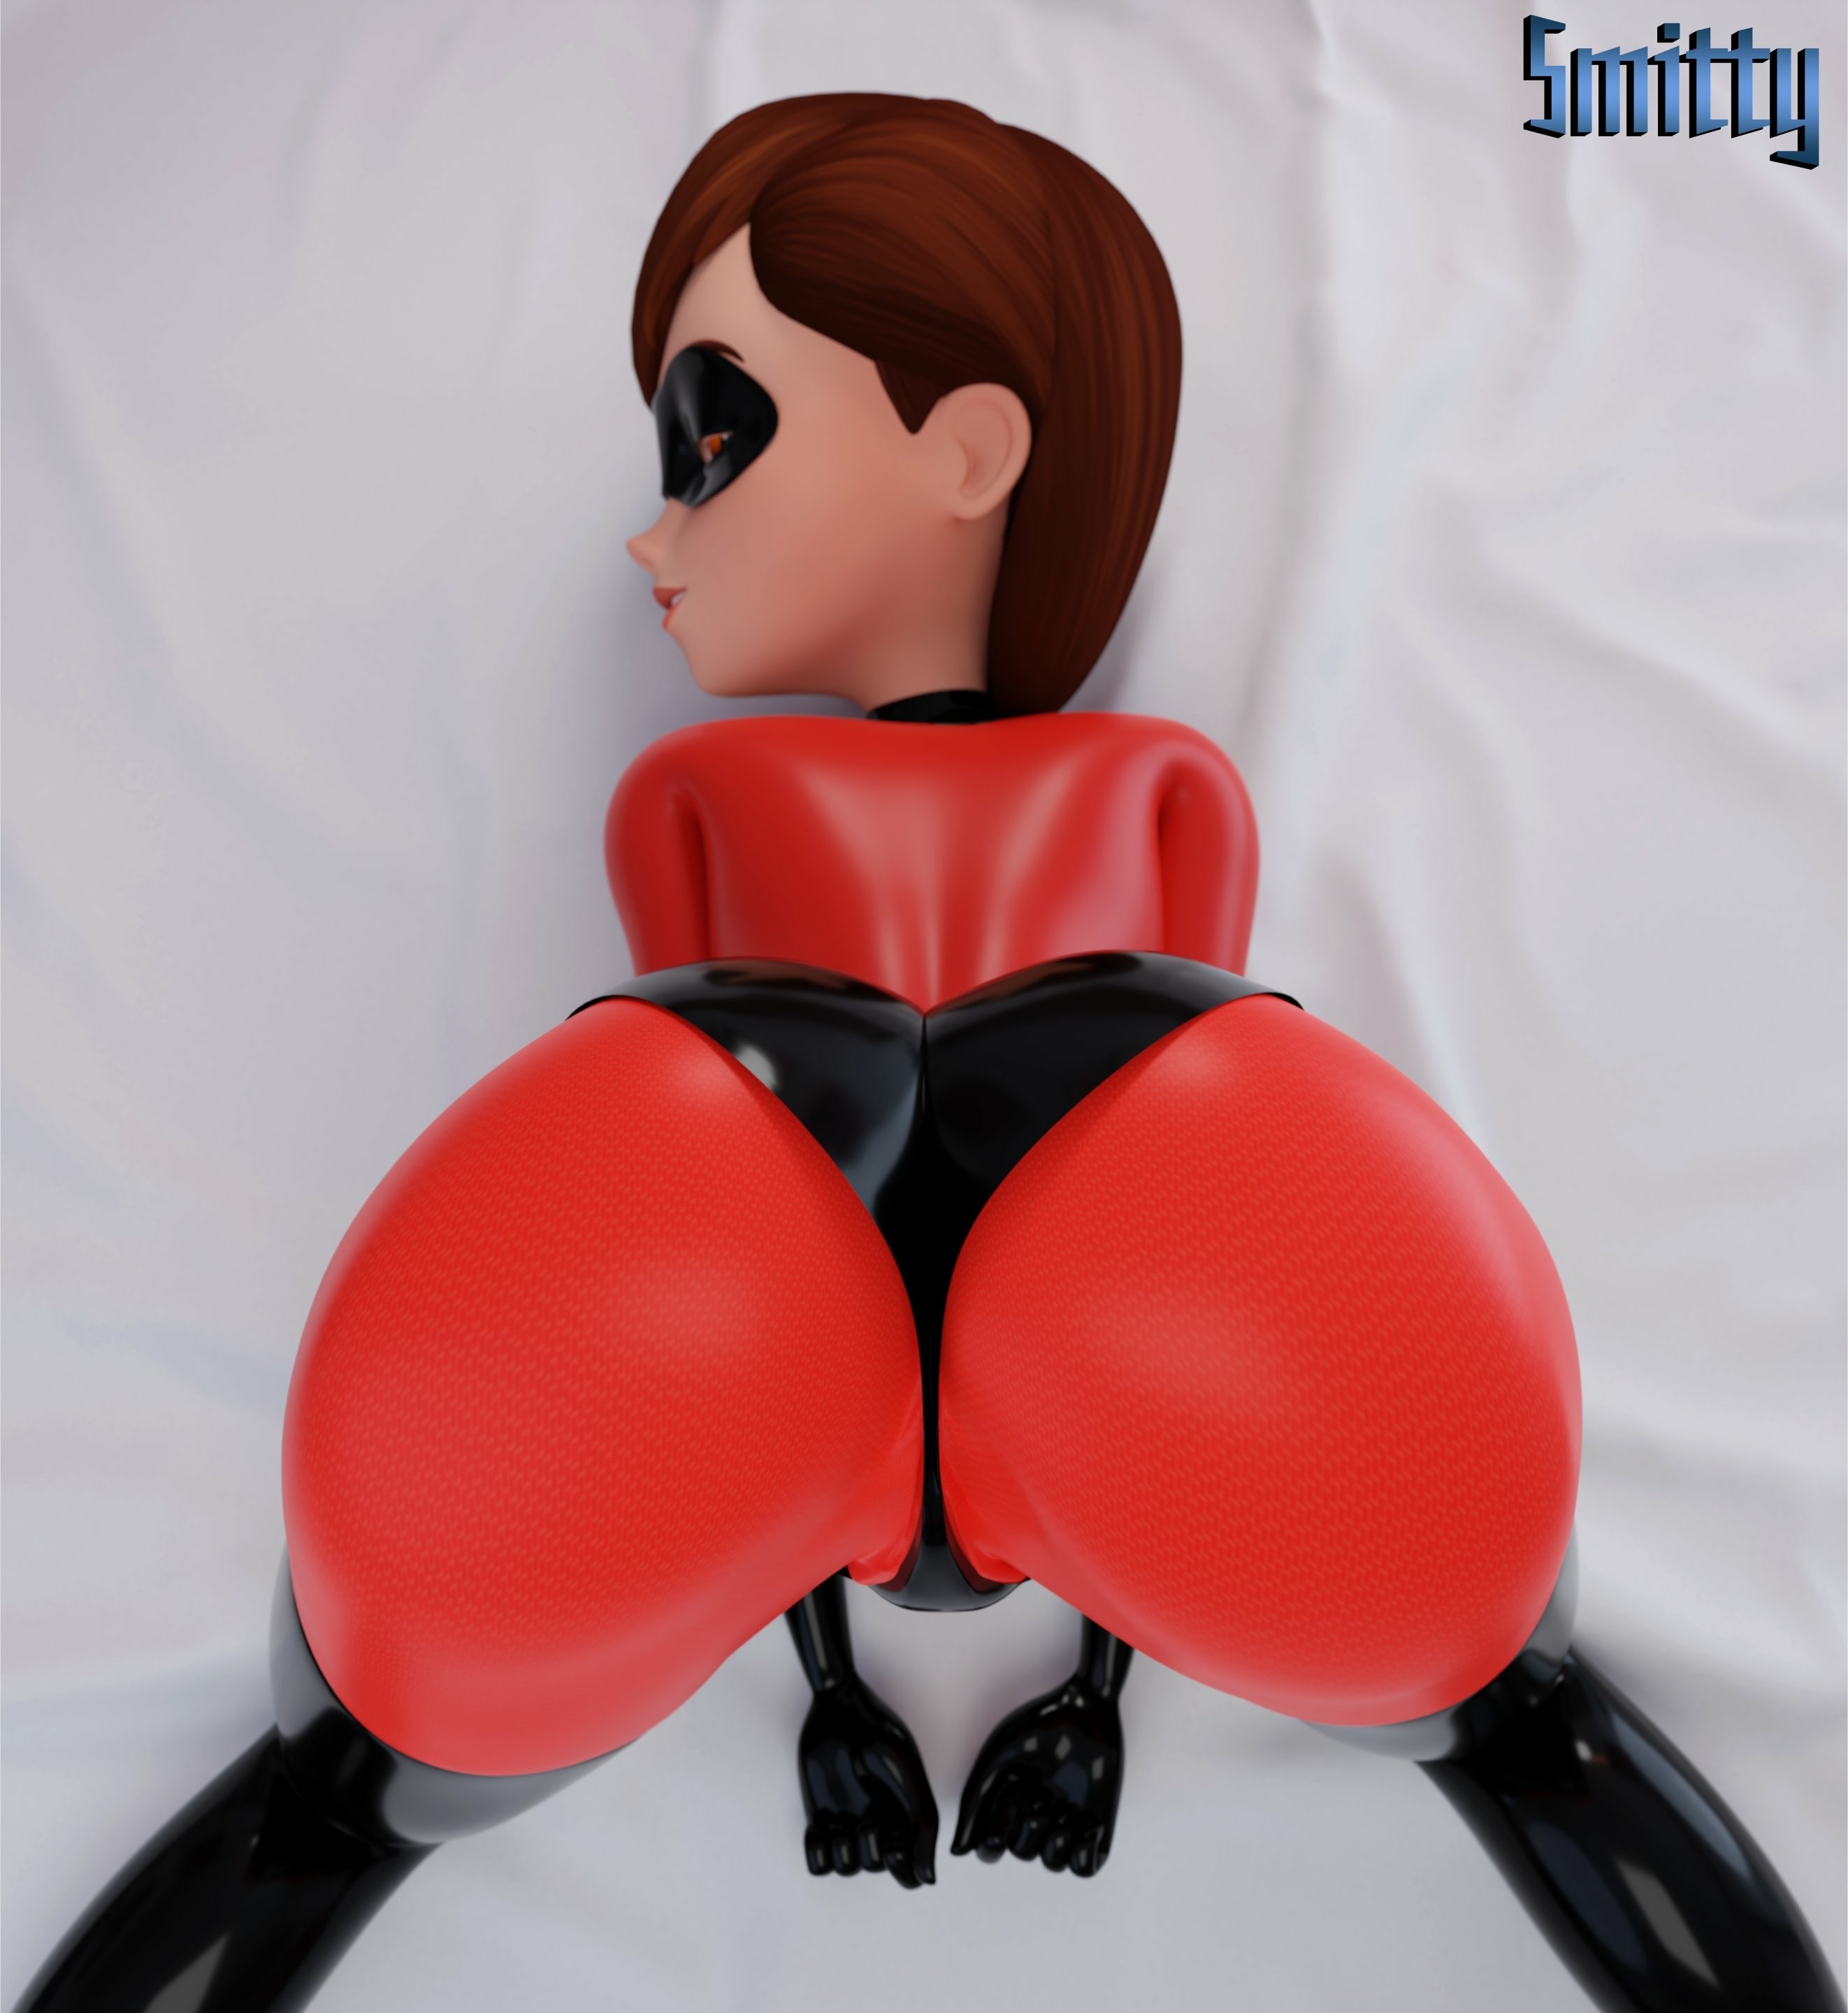 You see this on your bed presenting. What do ya do? Elastigirl The Incredibles Ass Cake Boobs Big boobs Big Ass Big Tits Horny Face Horny Sexy 3d Porn